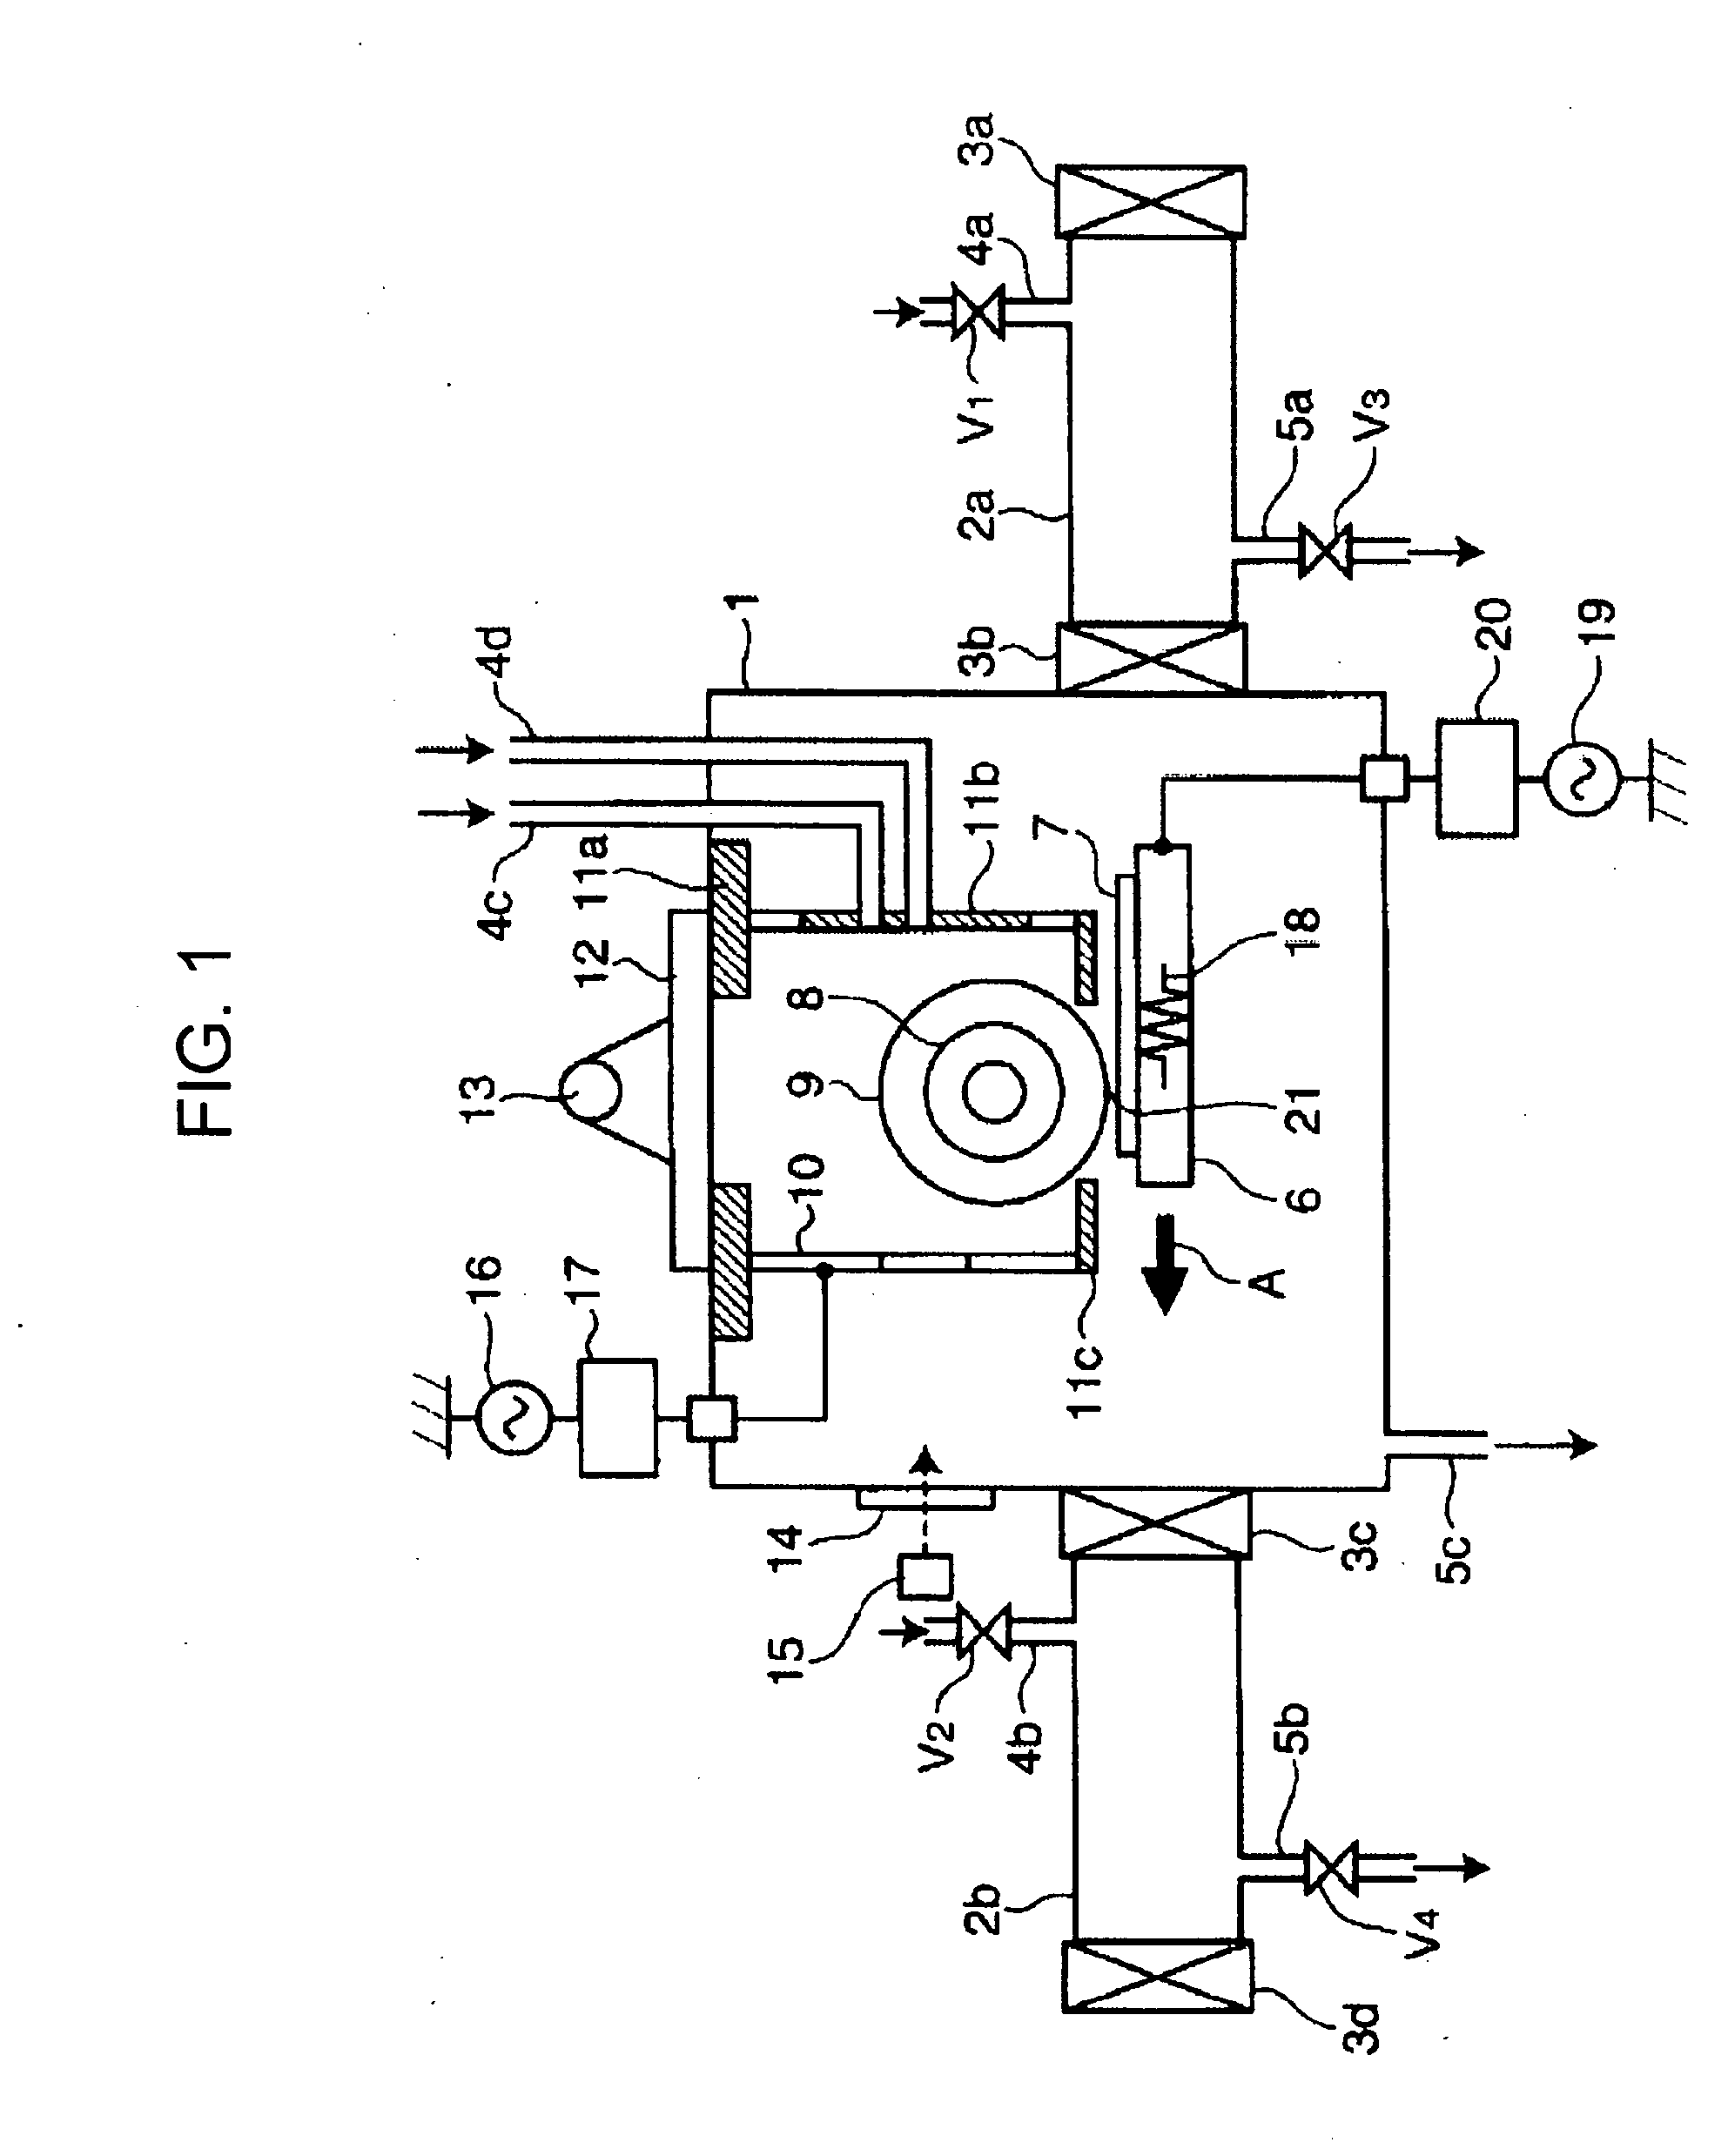 Copper base for electronic component, electronic component, and process for producing copper base for electronic component